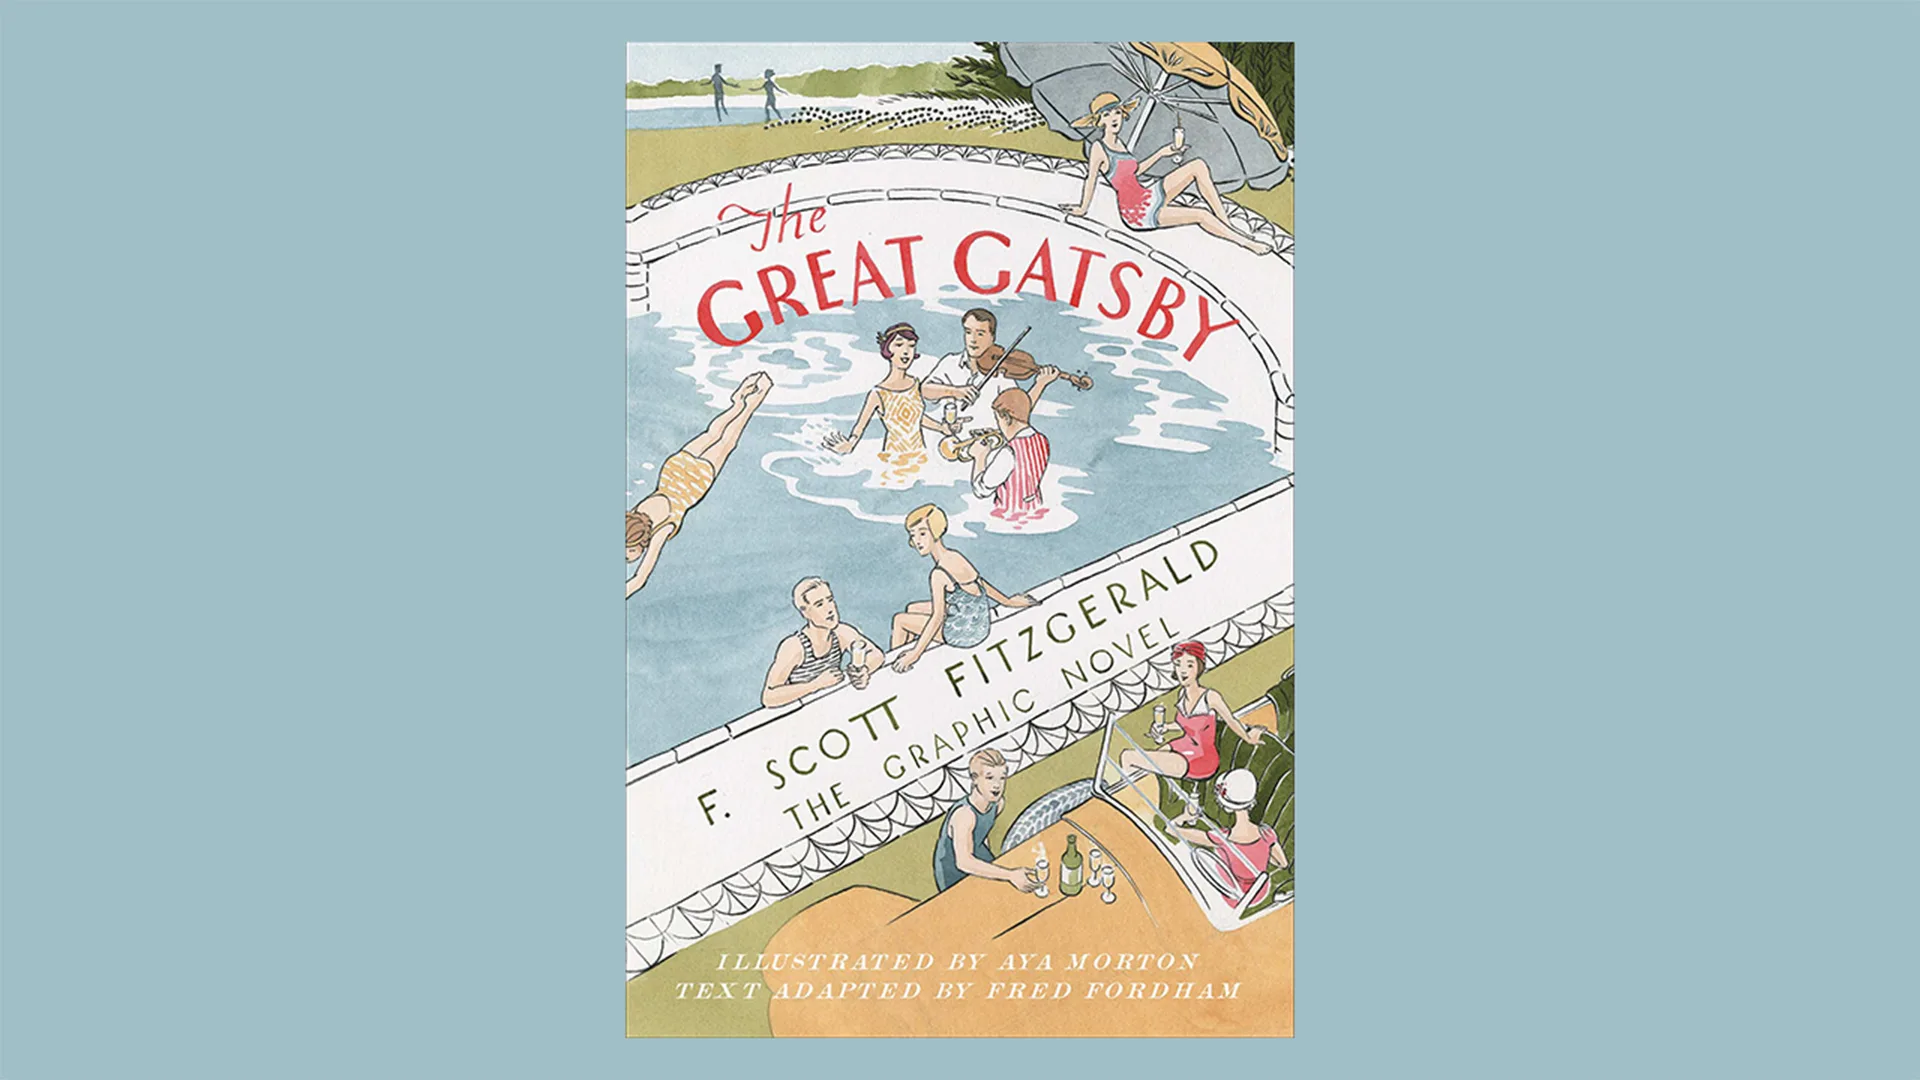 The graphic novel book cover of The Great Gatsby